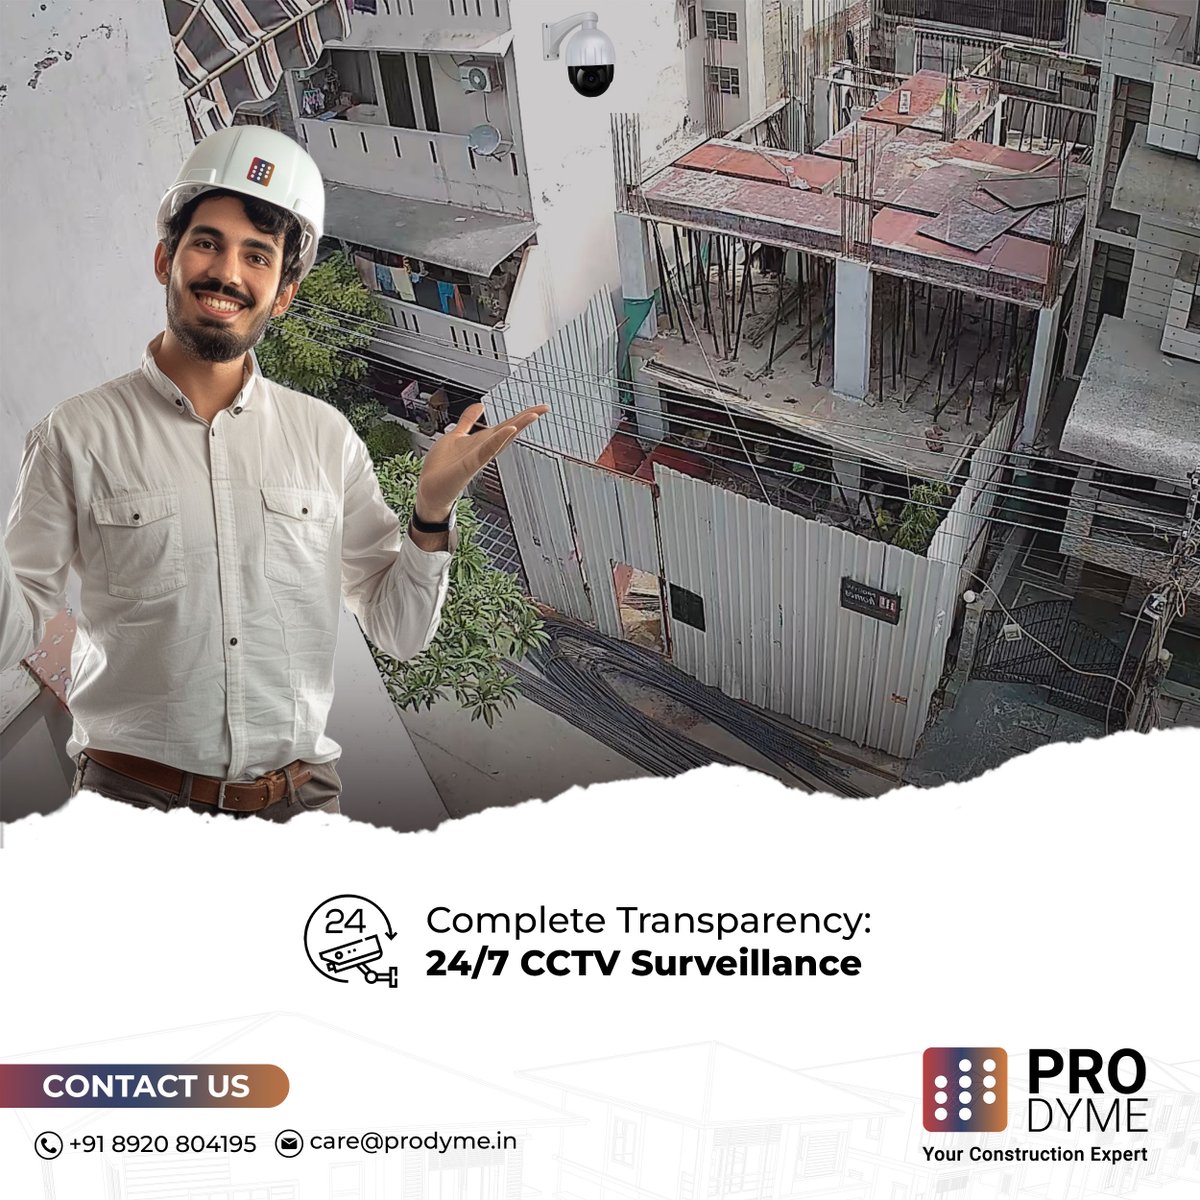 At Prodyme, we believe in transparency at every stage of construction. That's why we provide 24/7 CCTV surveillance.

.
#HomeConstruction #HomeRenovation #HomeBuilders #Construction #Renovation #CCTVAccess #HomeInterior #ModernHomes #ModernHomeConstruction #DelhiNCR #ProdymeHomes